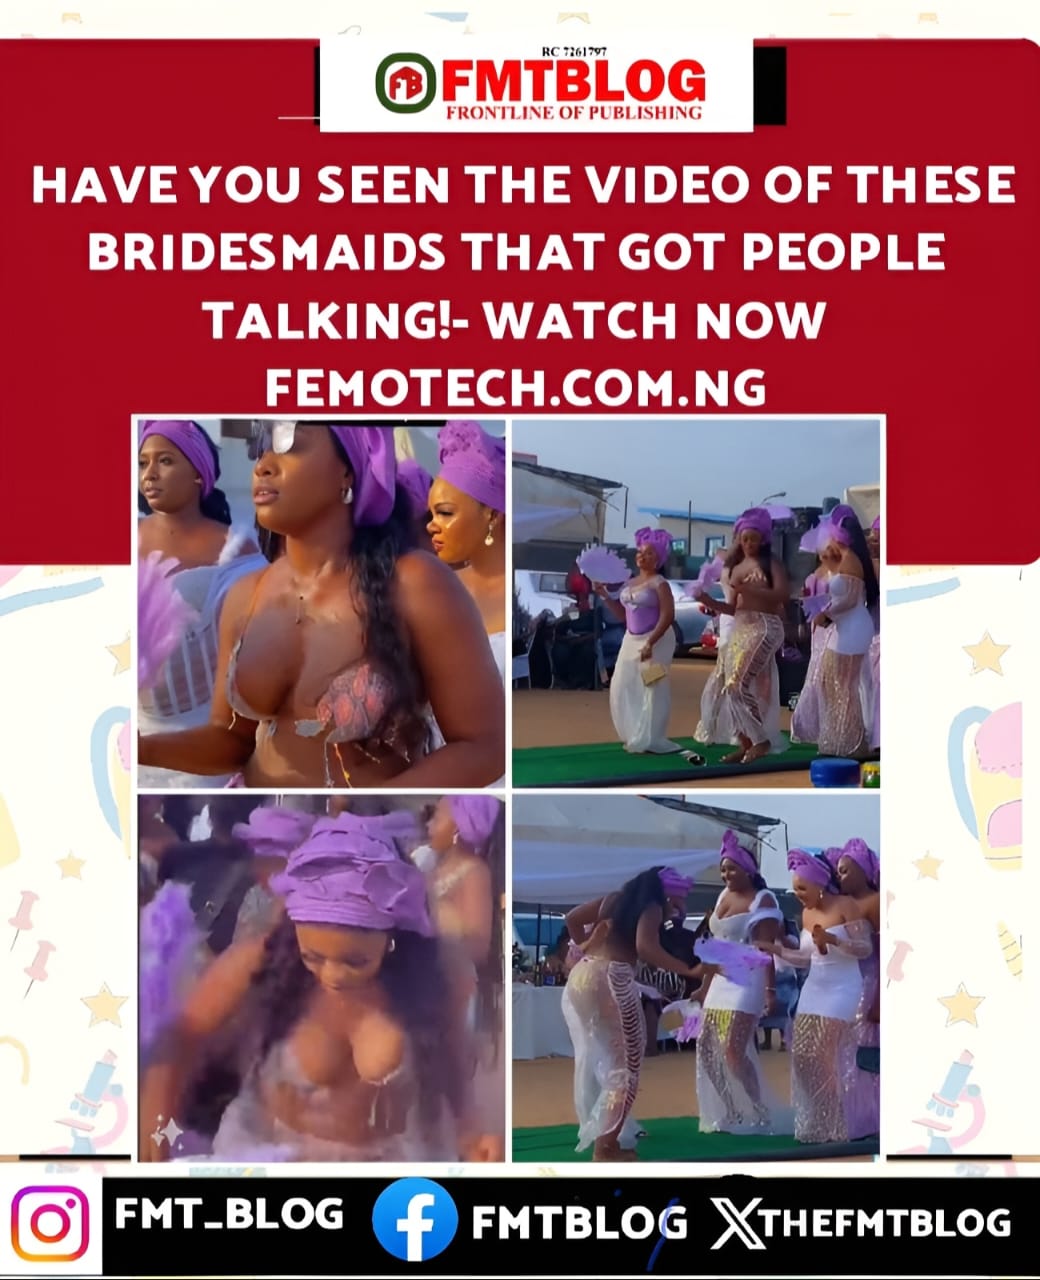 Have You Seen The Video Of These Bridesmaids That Got People Talking!-Watch Now